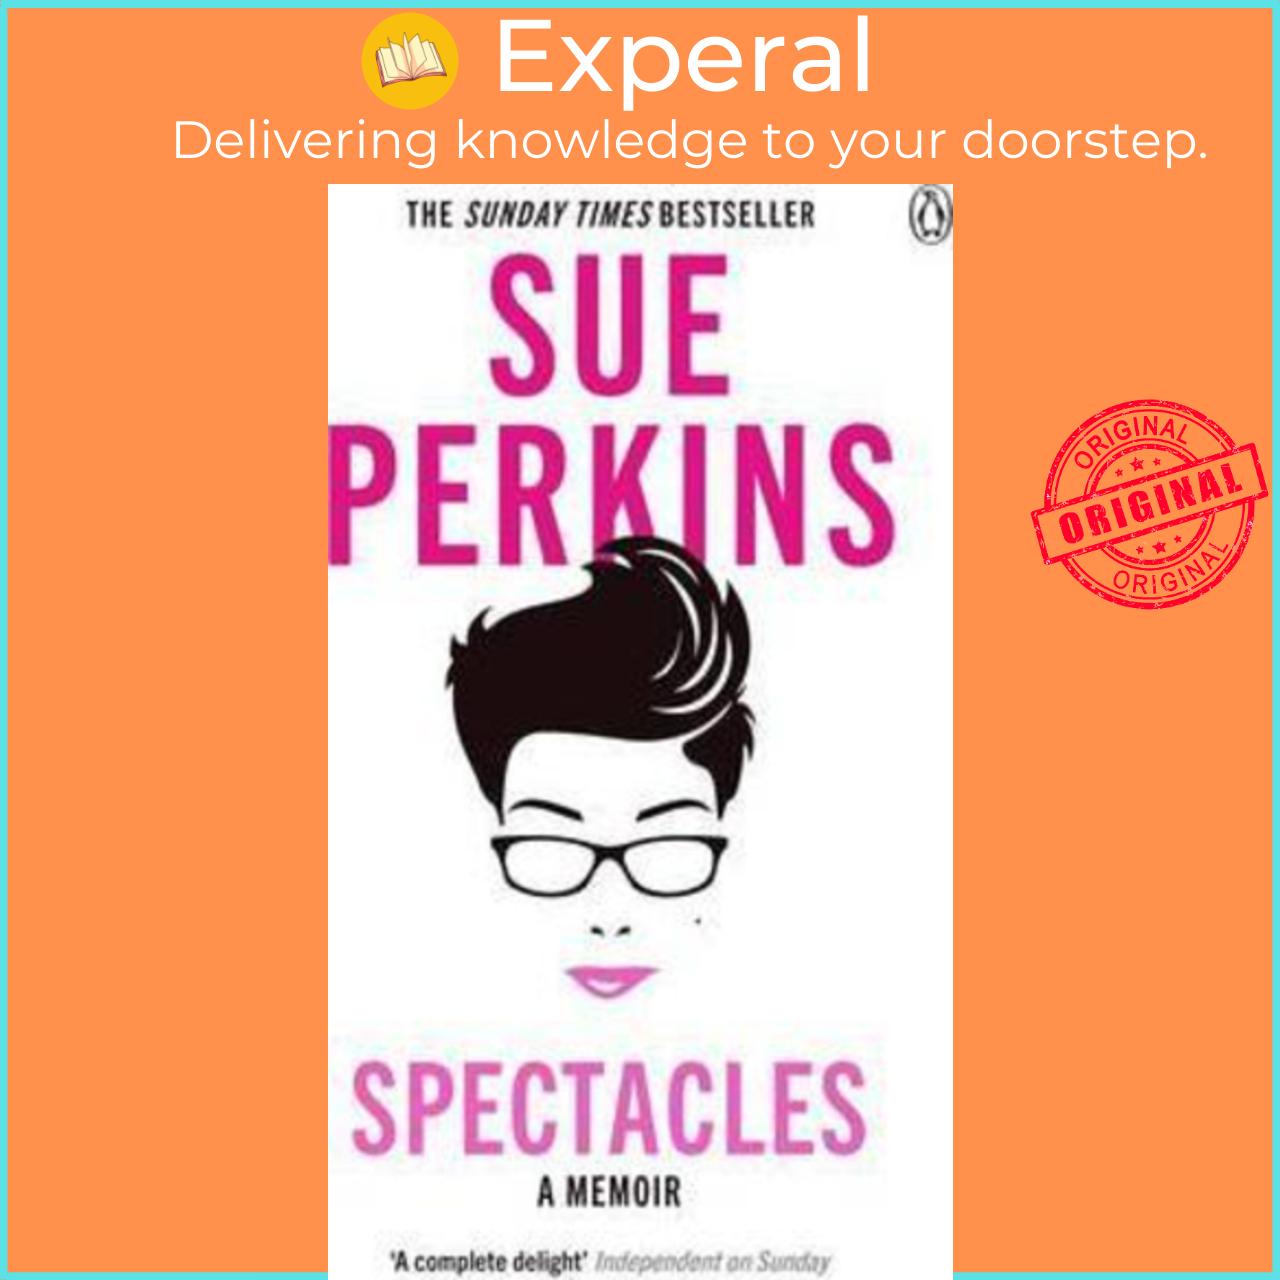 Sách - Spectacles by Sue Perkins (UK edition, paperback)